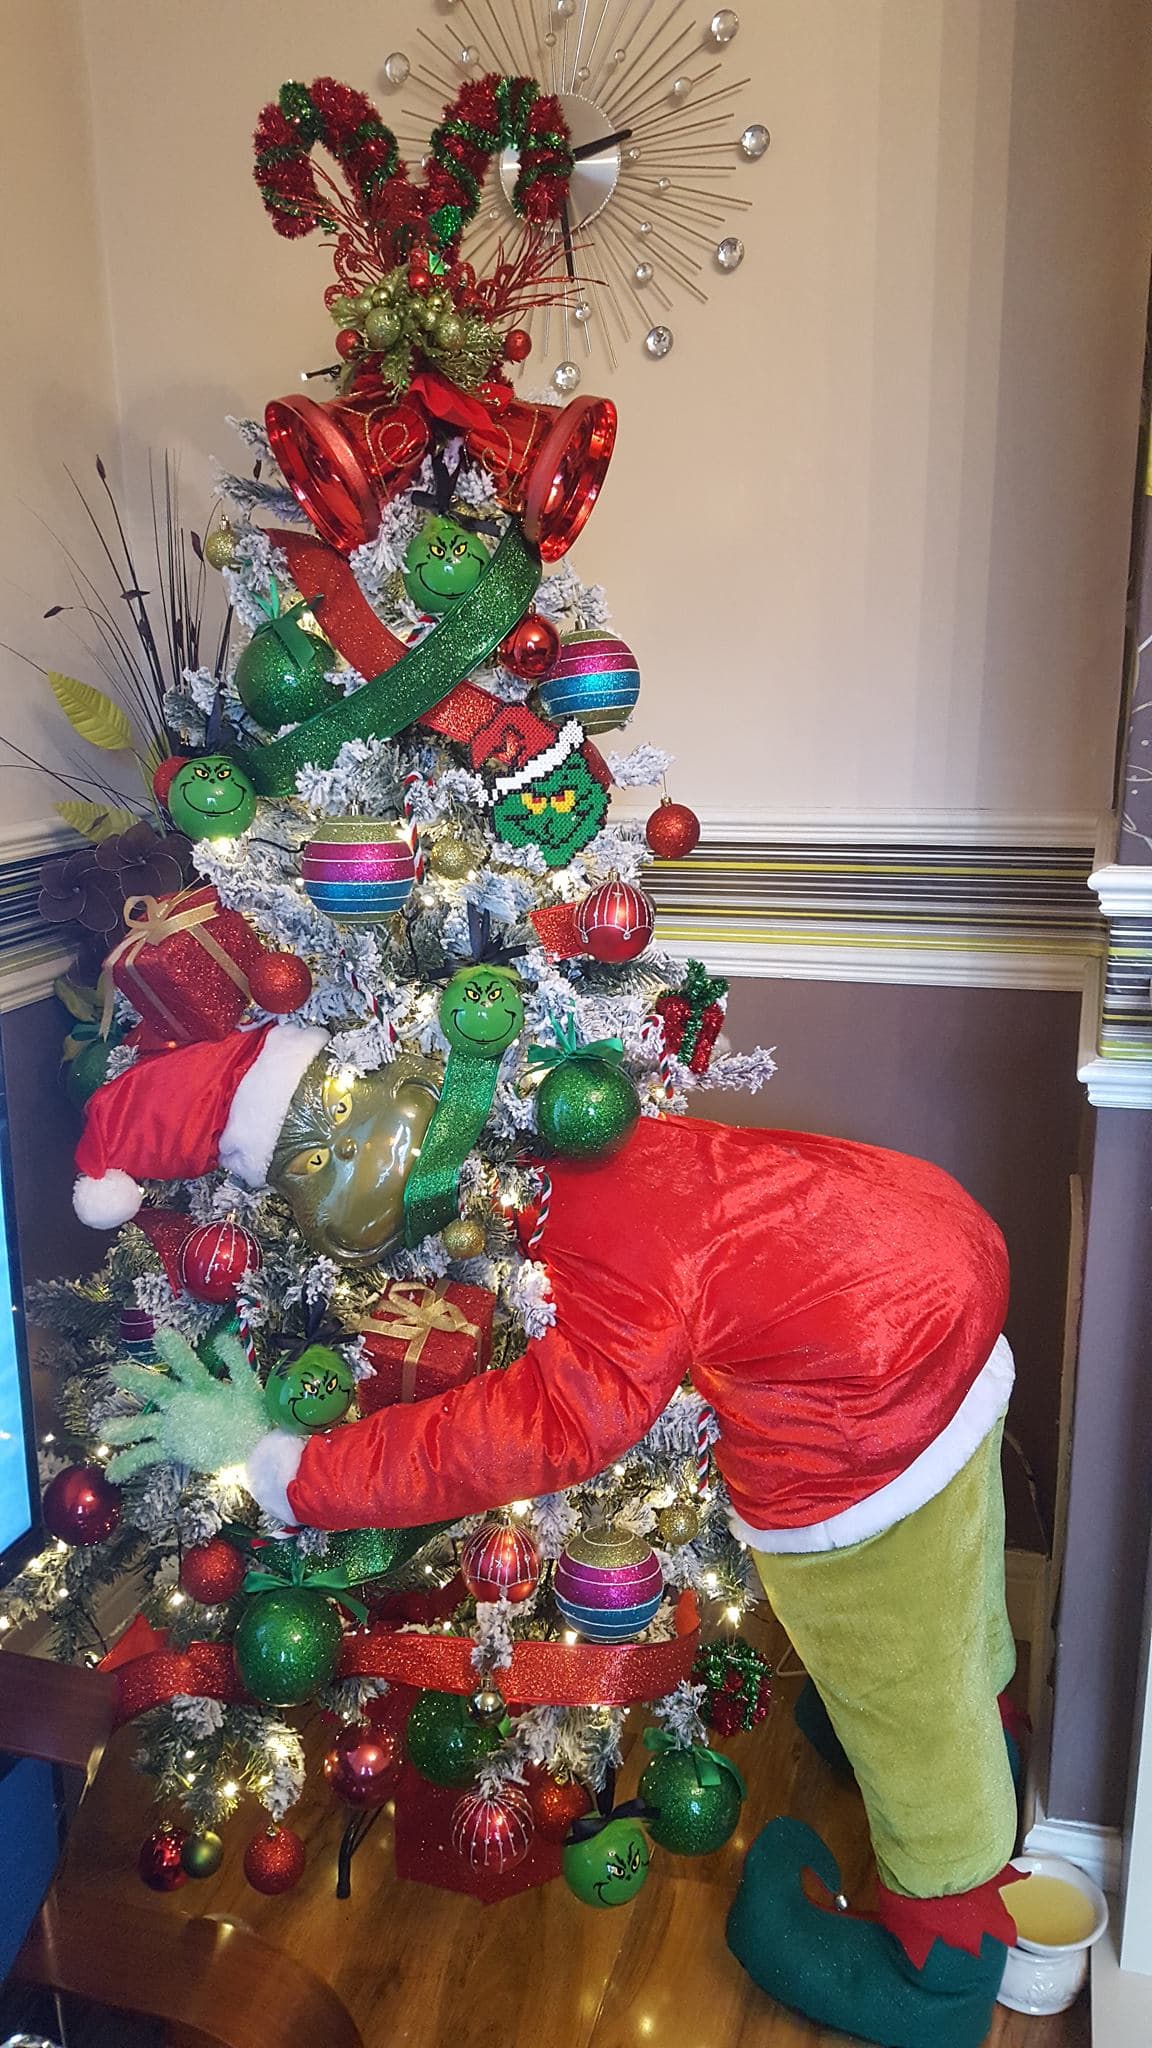 The Grinch Christmas Tree - Kitchen Fun With My 3 Sons